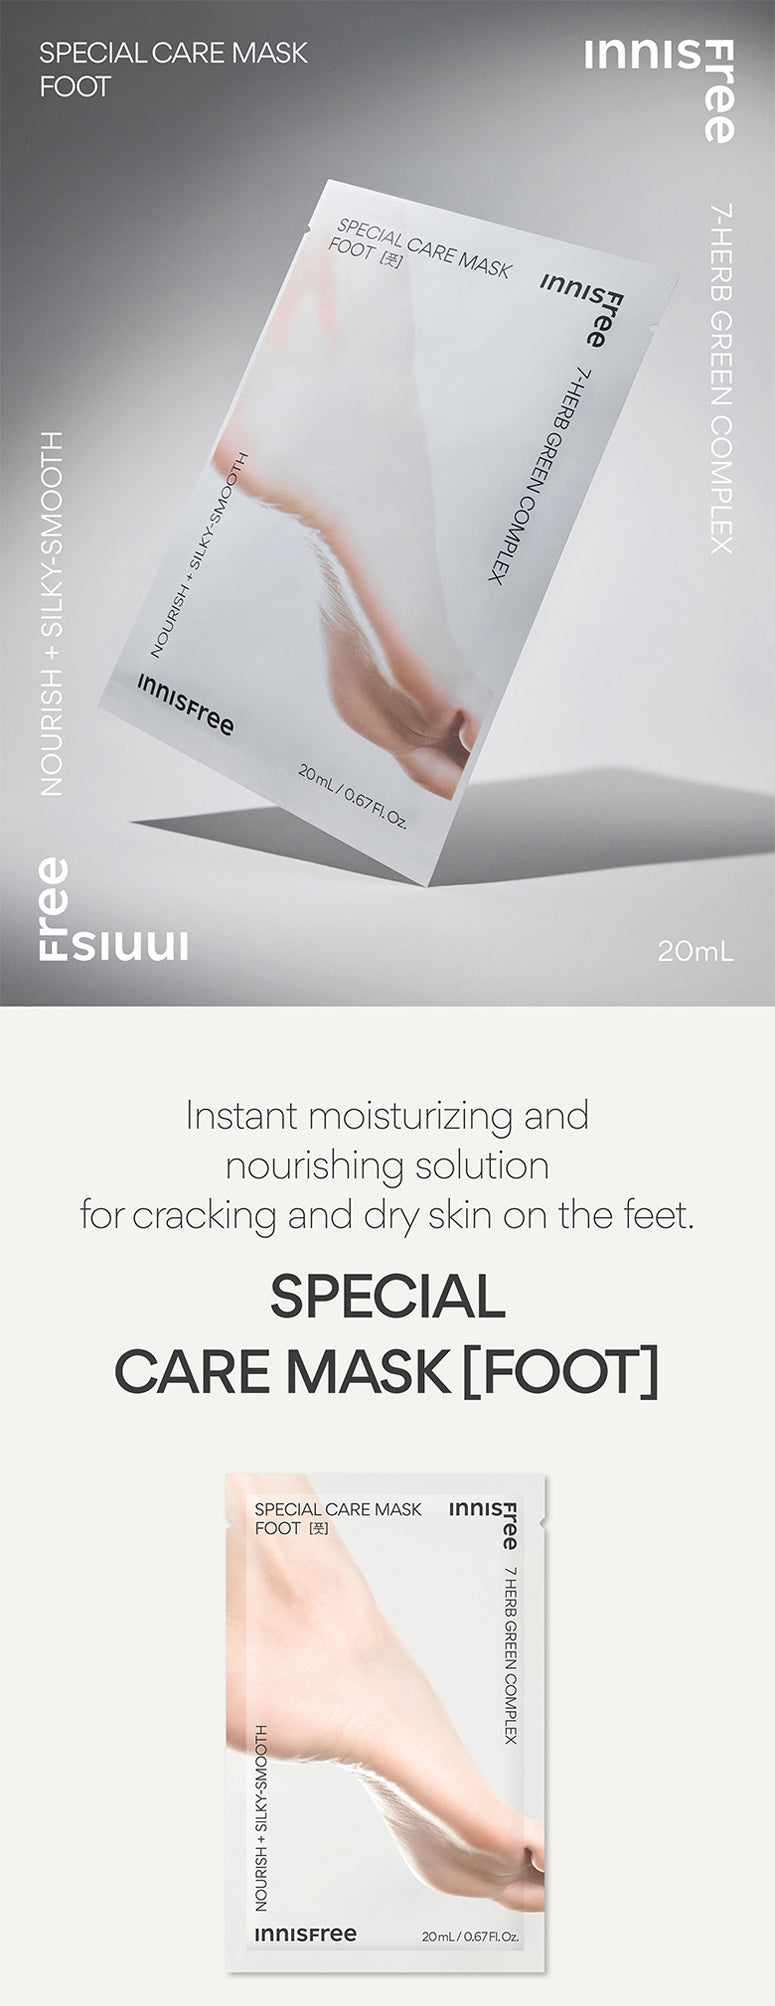 SPECIAL CARE MASK FOOT page one.